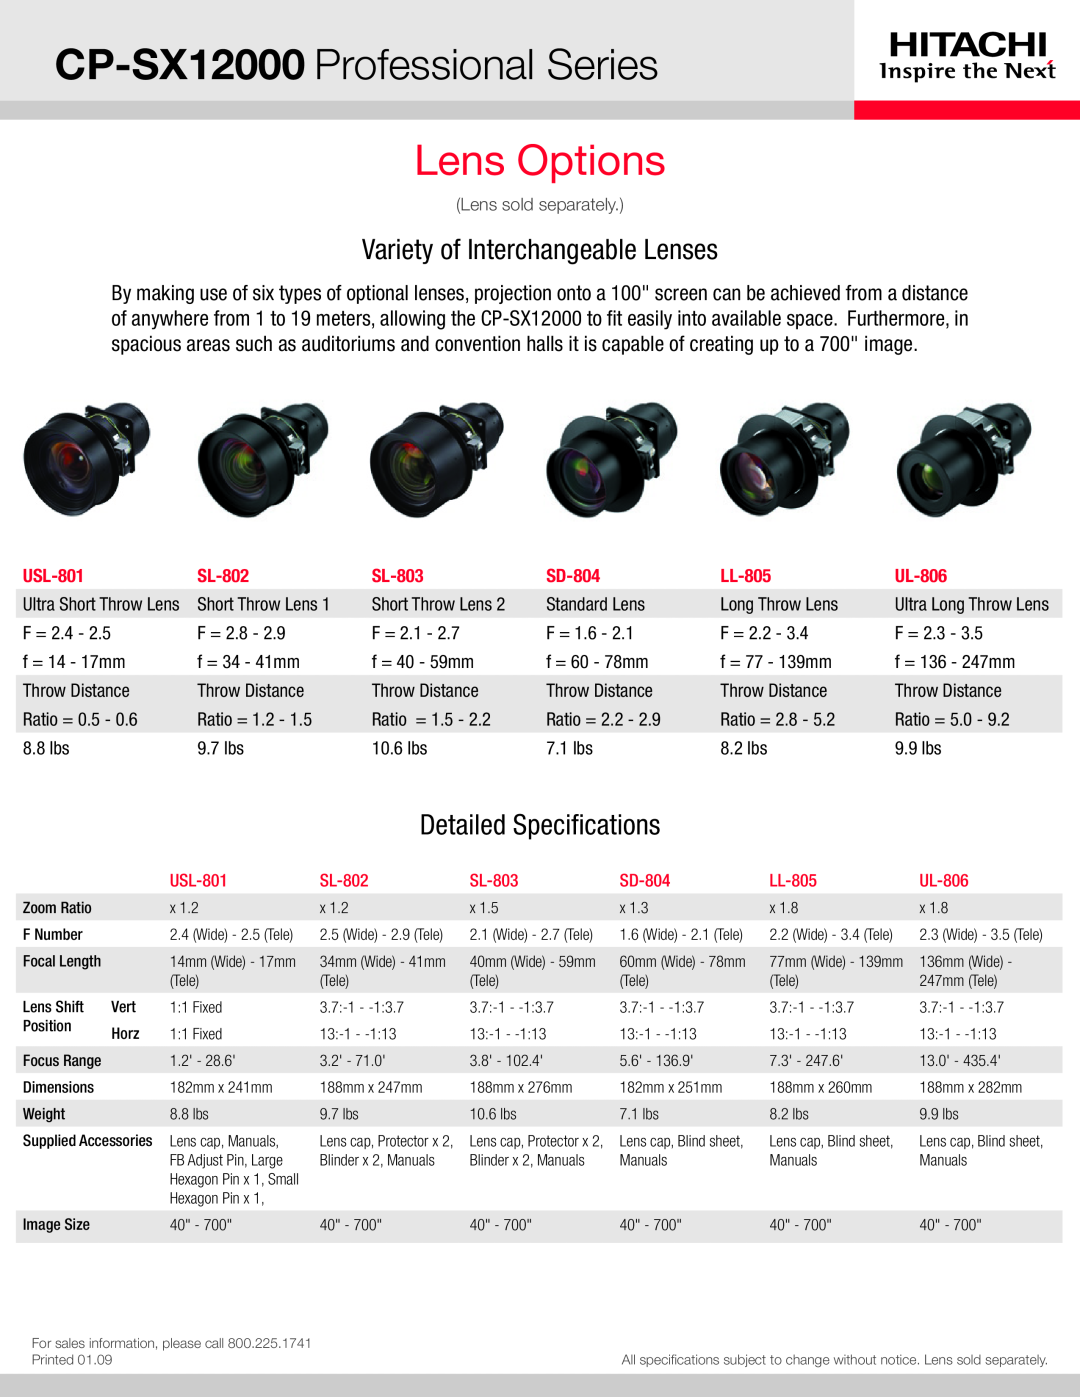 Hitachi manual CP-SX12000 Professional Series, Lens Options, Variety of Interchangeable Lenses, Detailed Specifications 